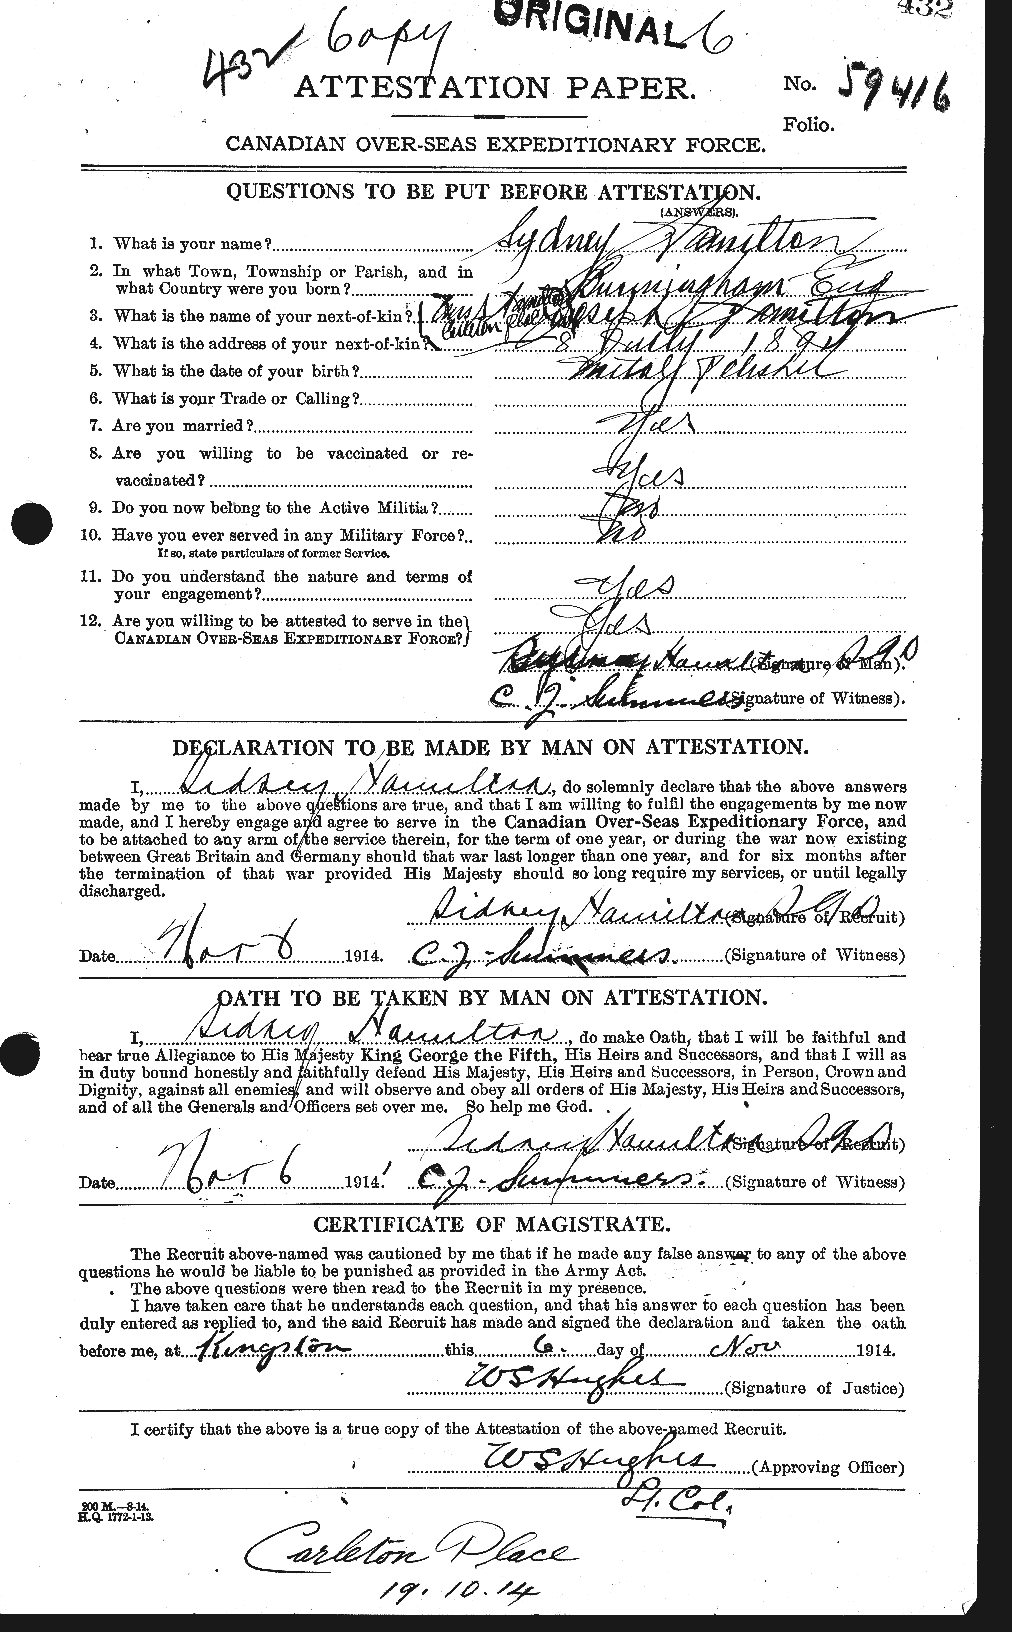 Personnel Records of the First World War - CEF 373326a